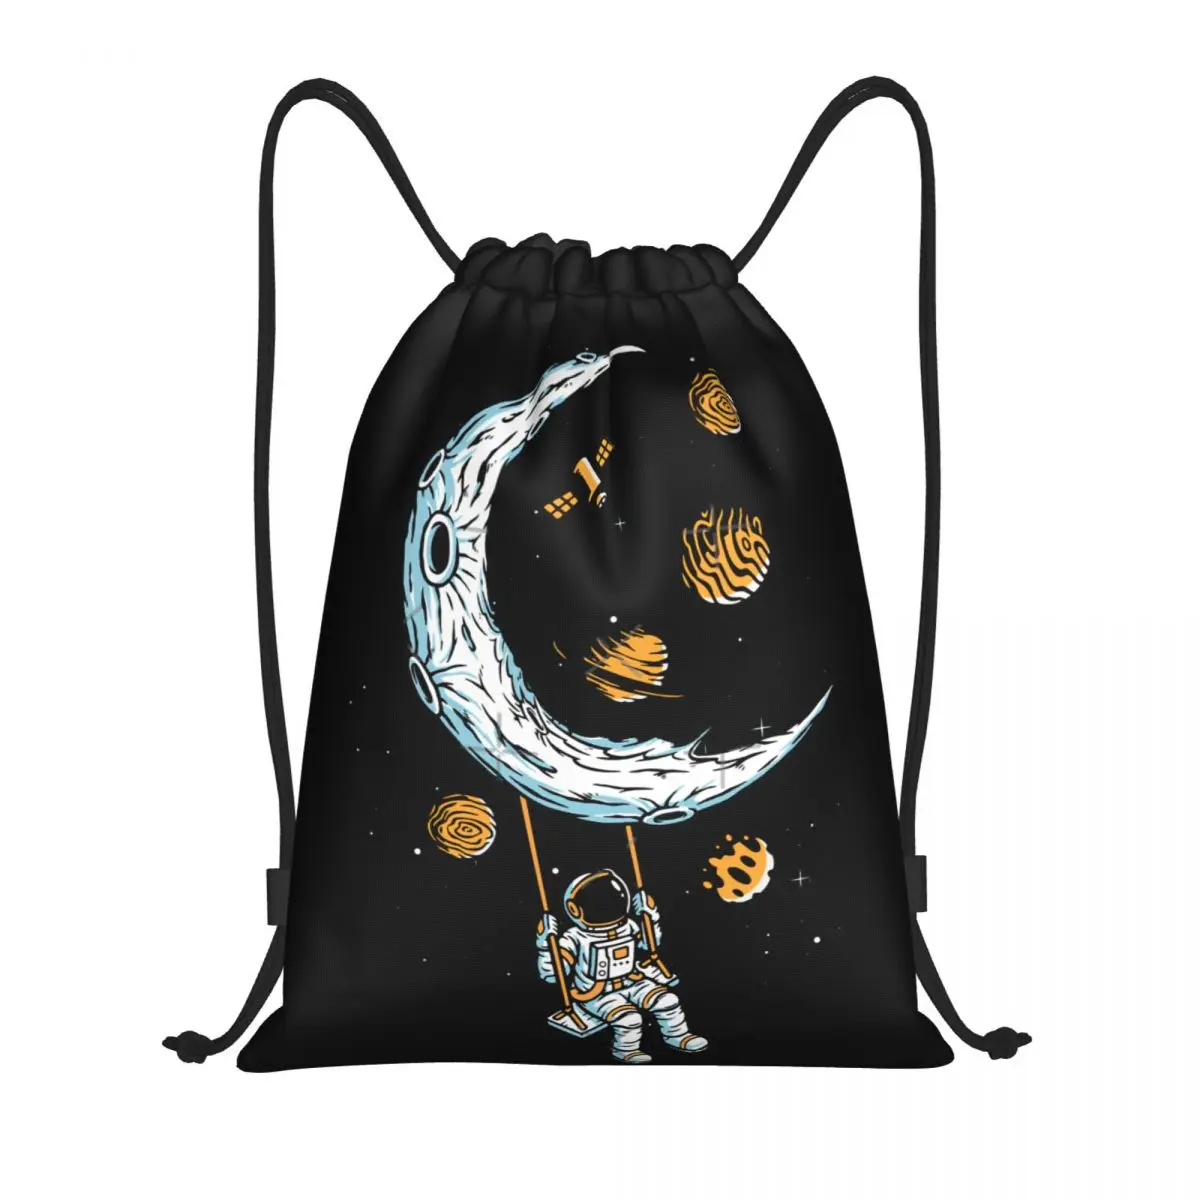 

Moon Travel The Clockwork Menagerie (Teal) 3 Drawstring Bags Gym Bag Graphic Backpack Funny Sarcastic Drawstring Backpack Secure